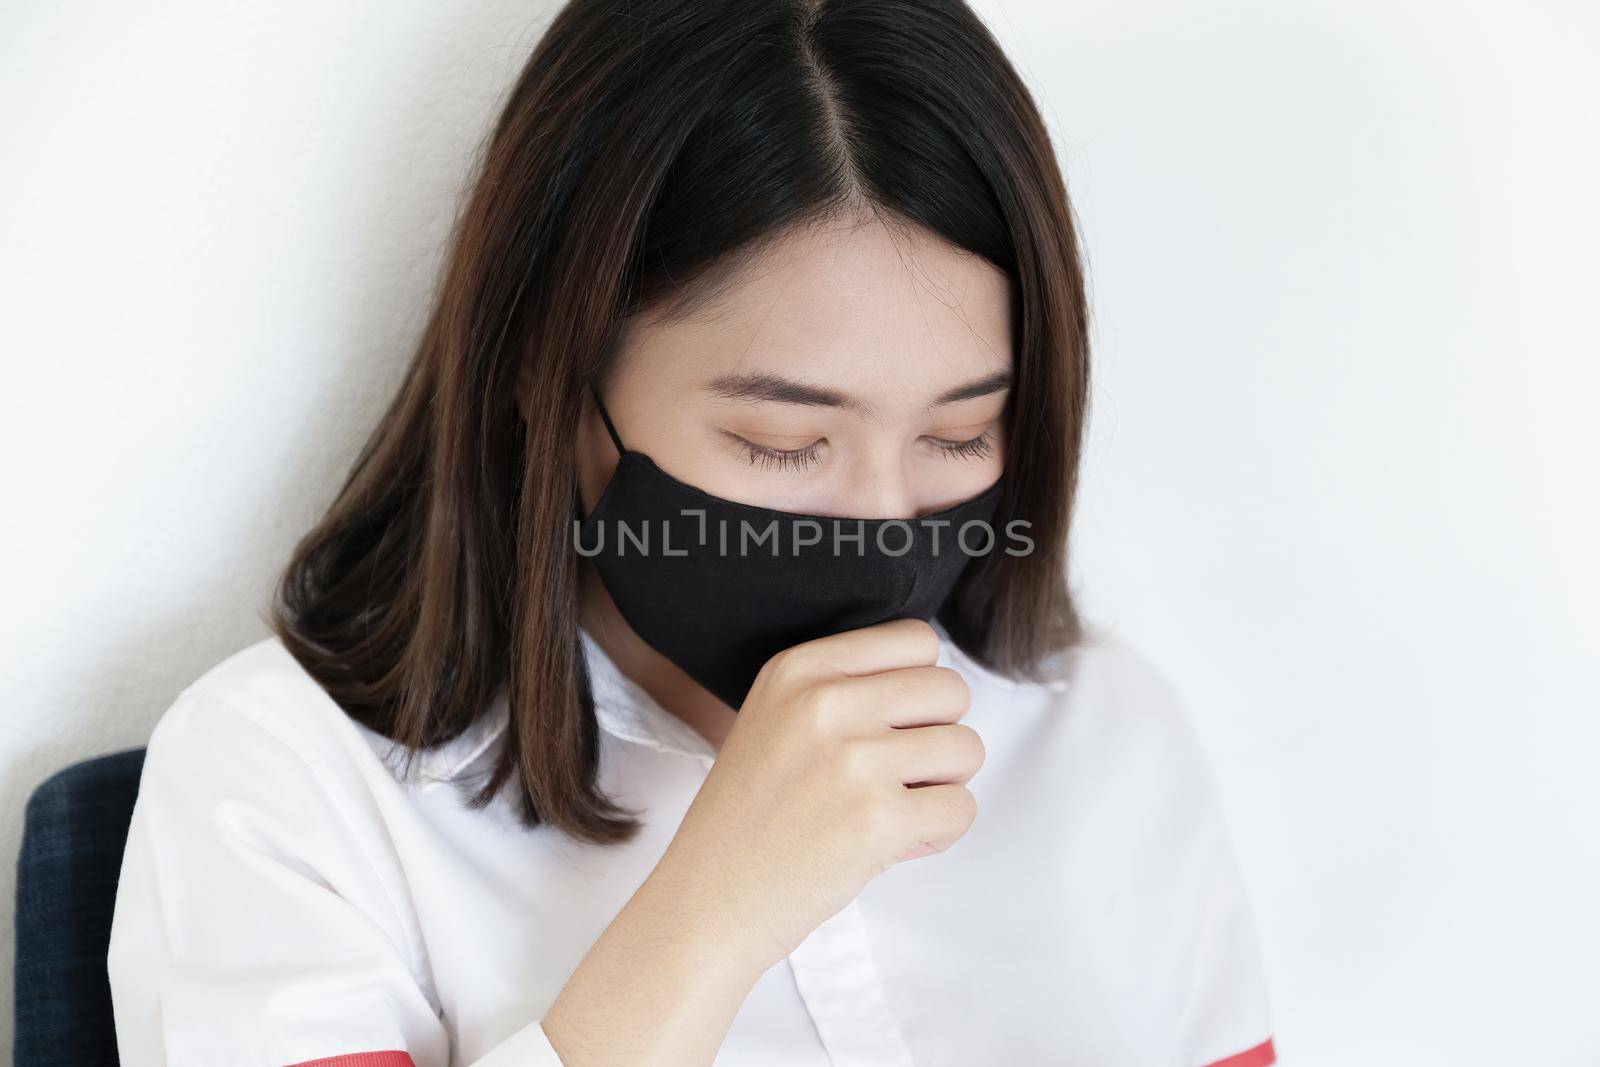 A young woman shows a cough that may be caused by a coronavirus infection